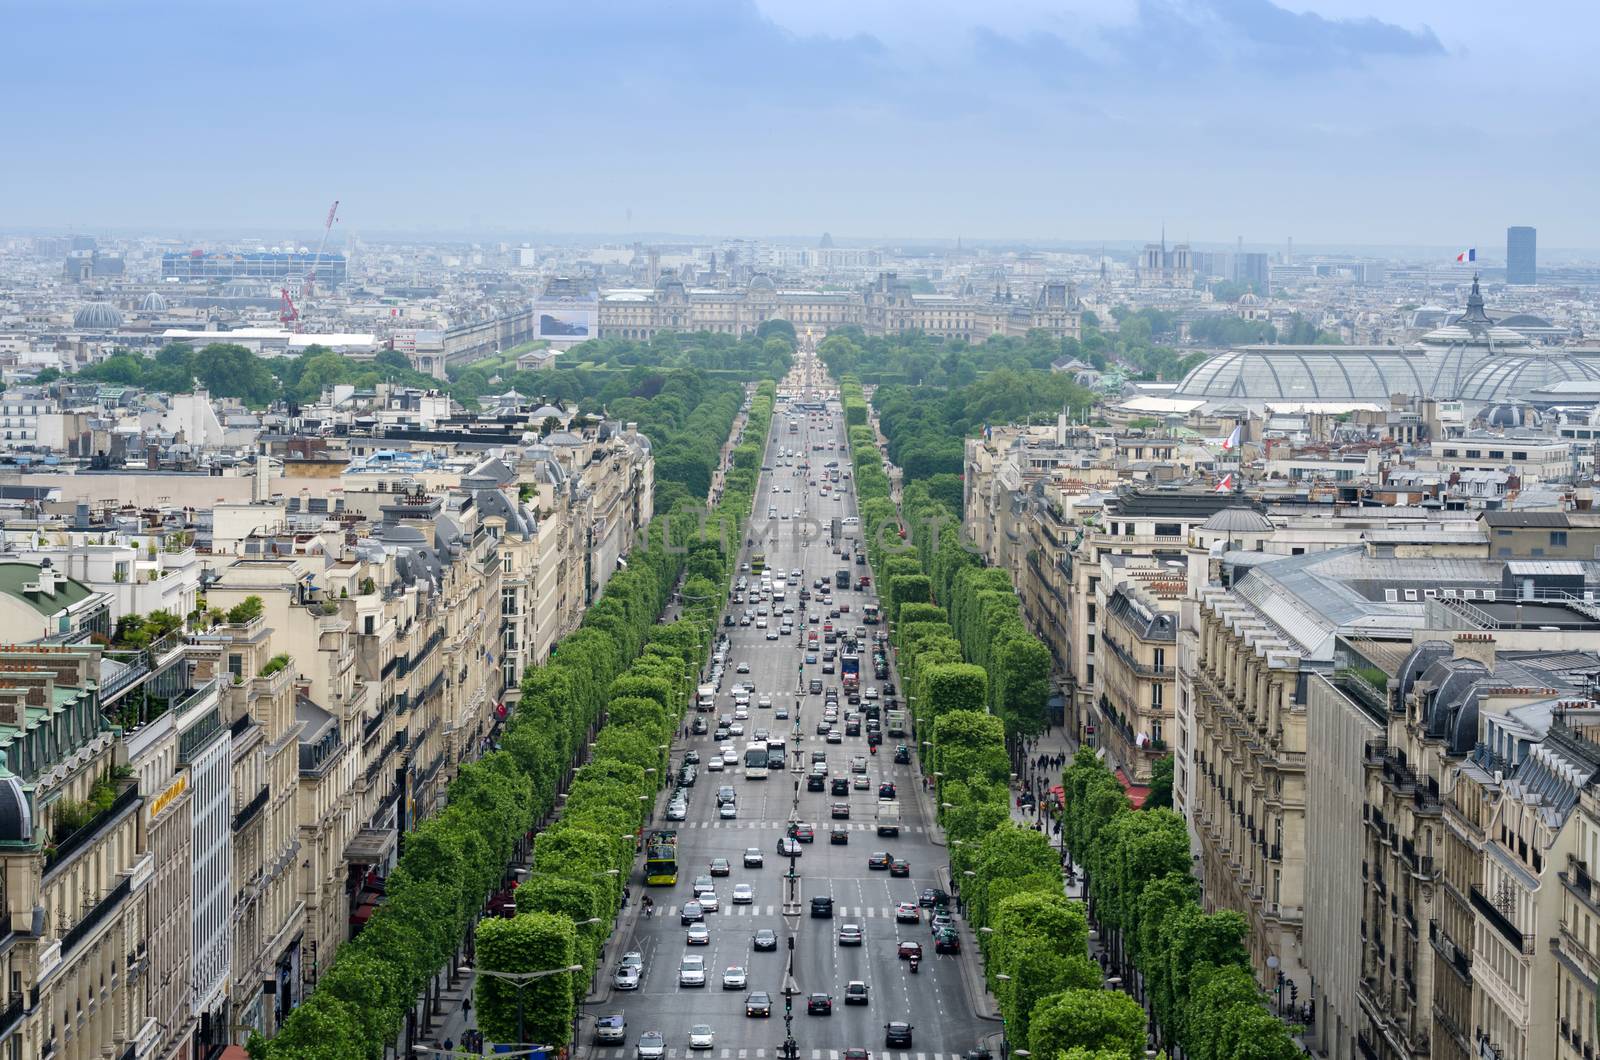 Champs Elysees from the Arc de Triomphe in Paris, France